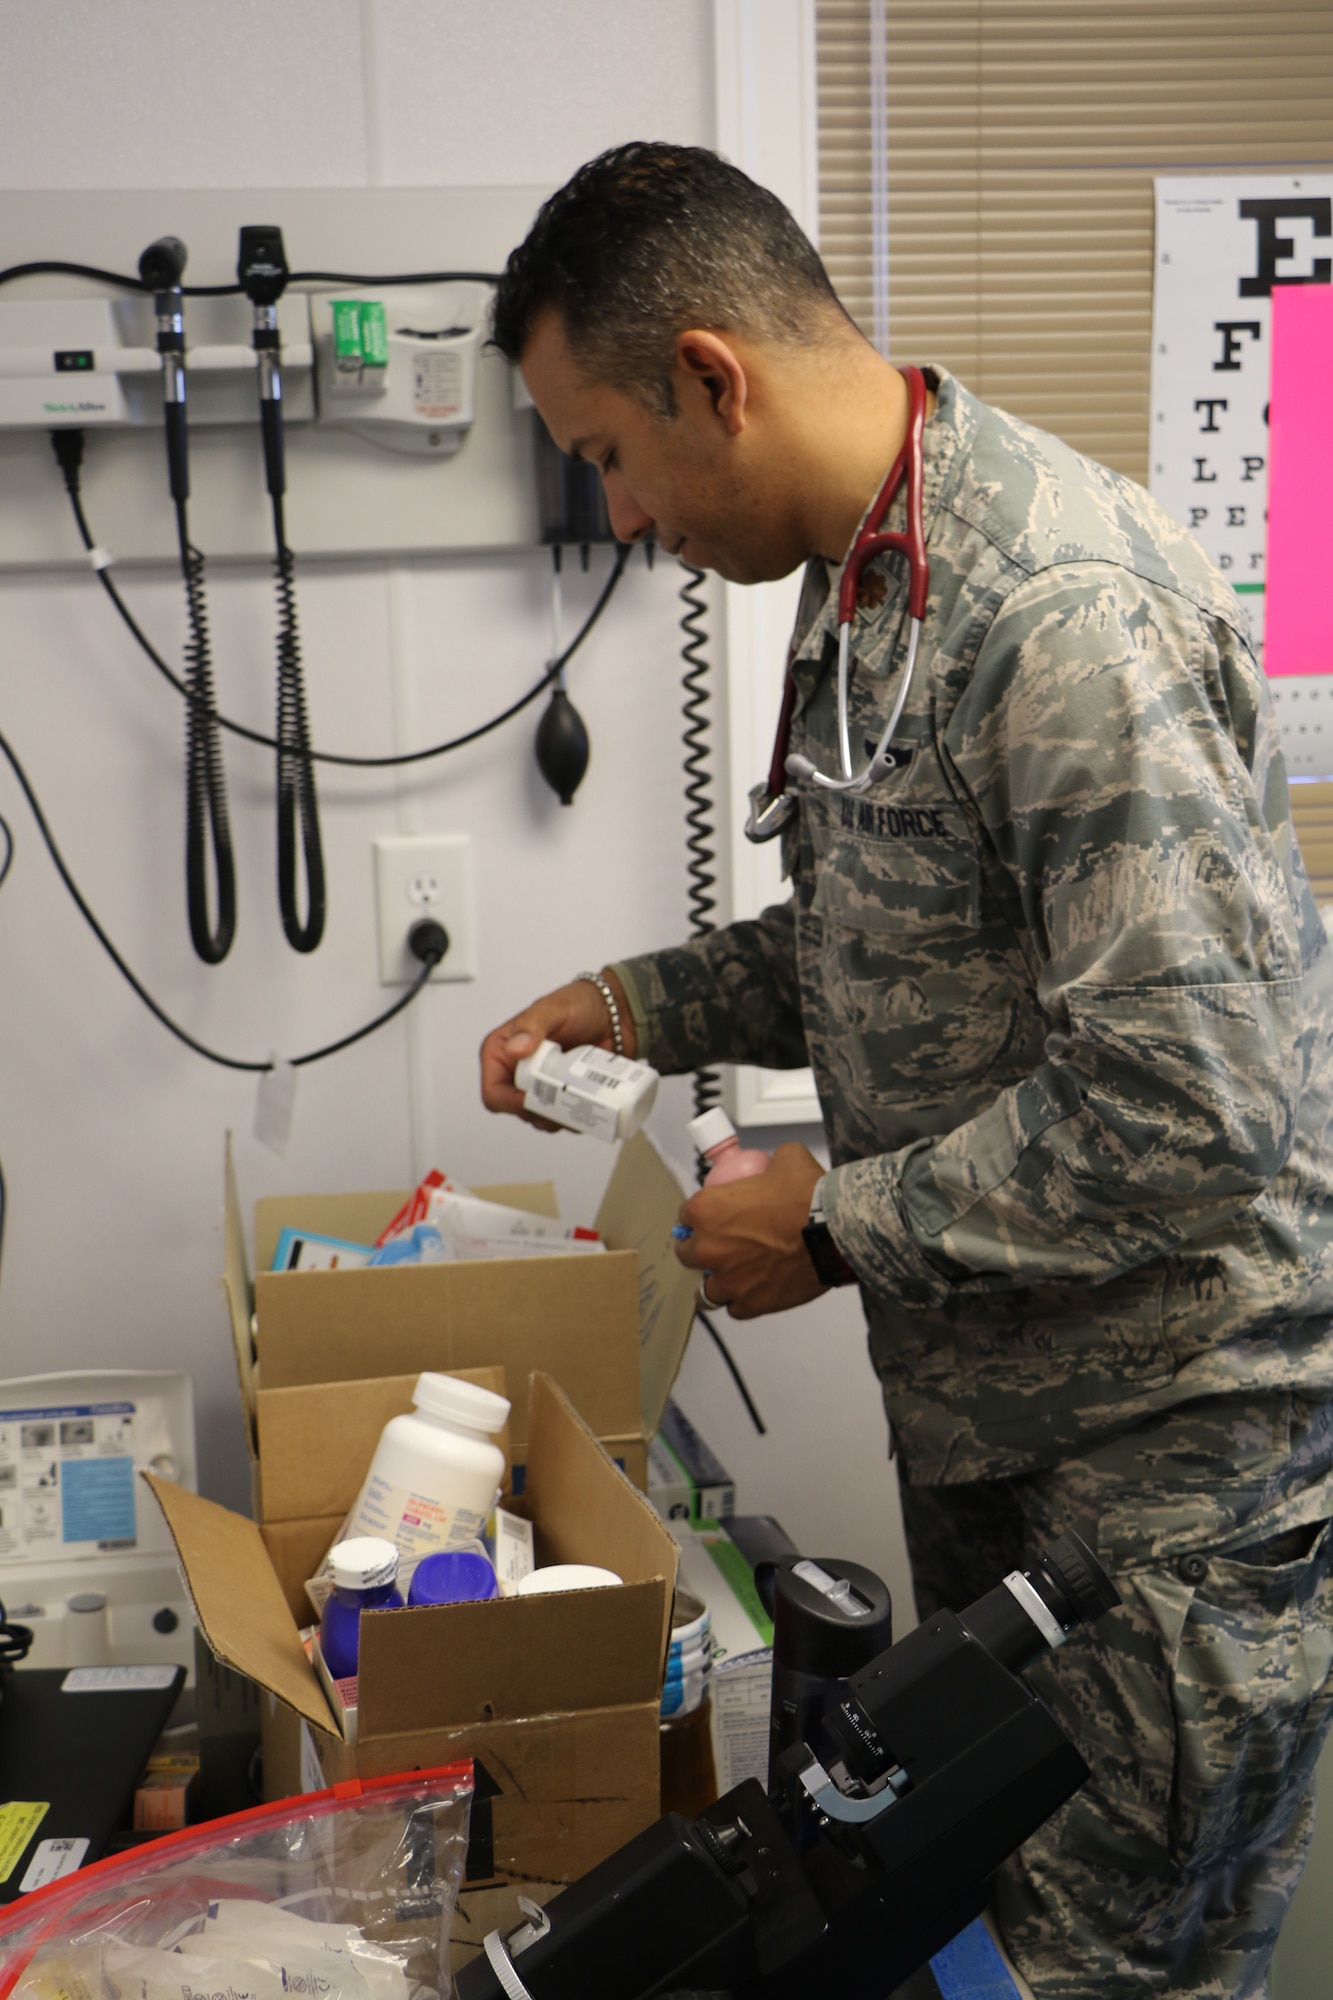 Major Vashun Rodriguez a flight surgeon assigned to the 927th Aeromedical Staging Squadron, MacDill Air Force Base FL, selects the proper antibiotic for a patient at the Kivalina Clinic, Kivalina, Alaska, April 18, 2018 in support of Arctic Care. Innovative Readiness Training exercises such as Arctic Care 2018 continue to build on the long-standing tradition of U.S. Armed Forces addressing the underserved community health and civic needs of the Northwest Arctic Borough. (U.S. Air Force photo by Maj. Joseph Simms)